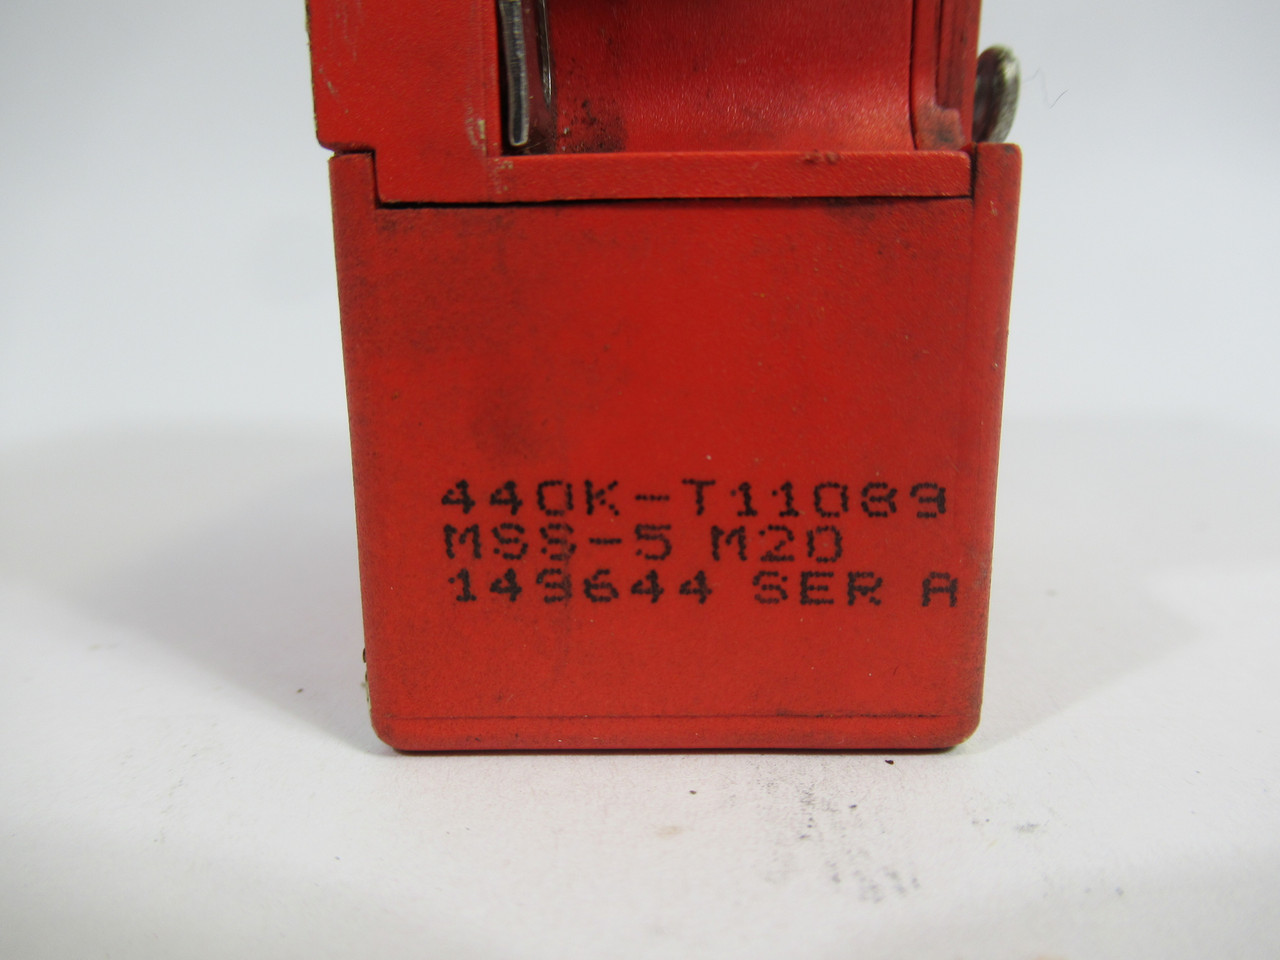 Allen-Bradley 440K-T11089 Safety Switch Series A Cosmetic Damage USED